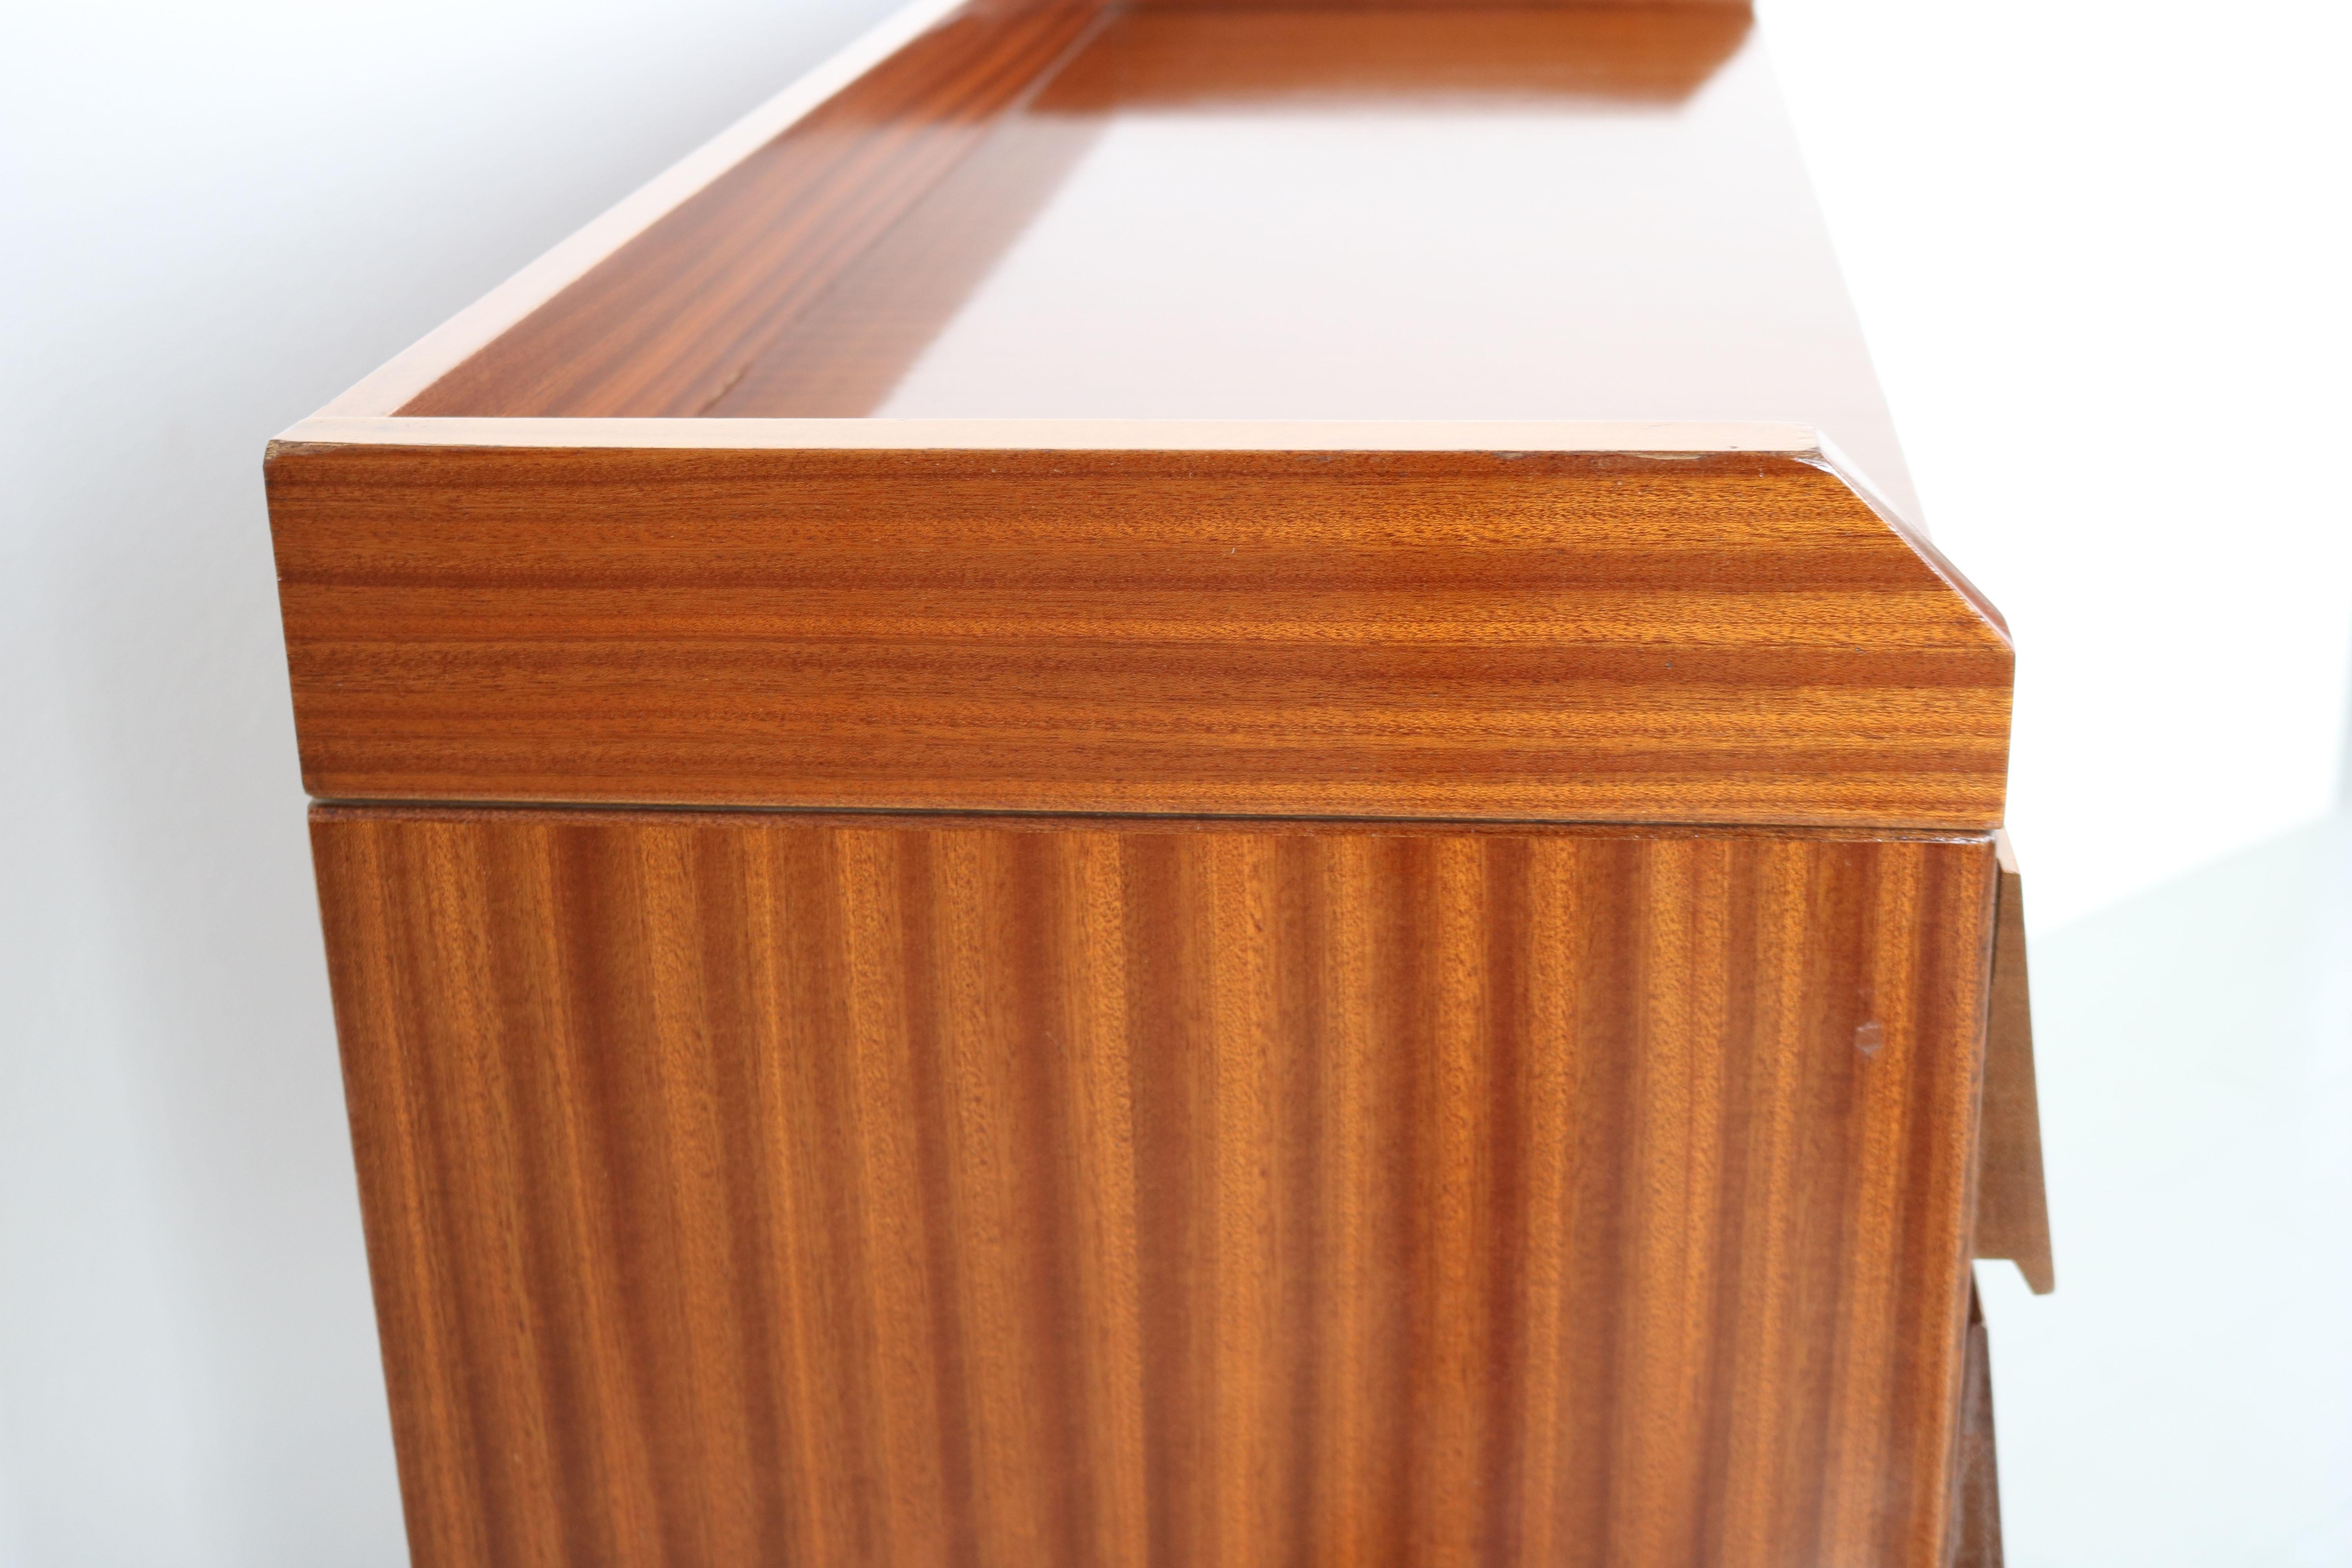 Mahogany Office Chest of Drawers, Manufactured by 